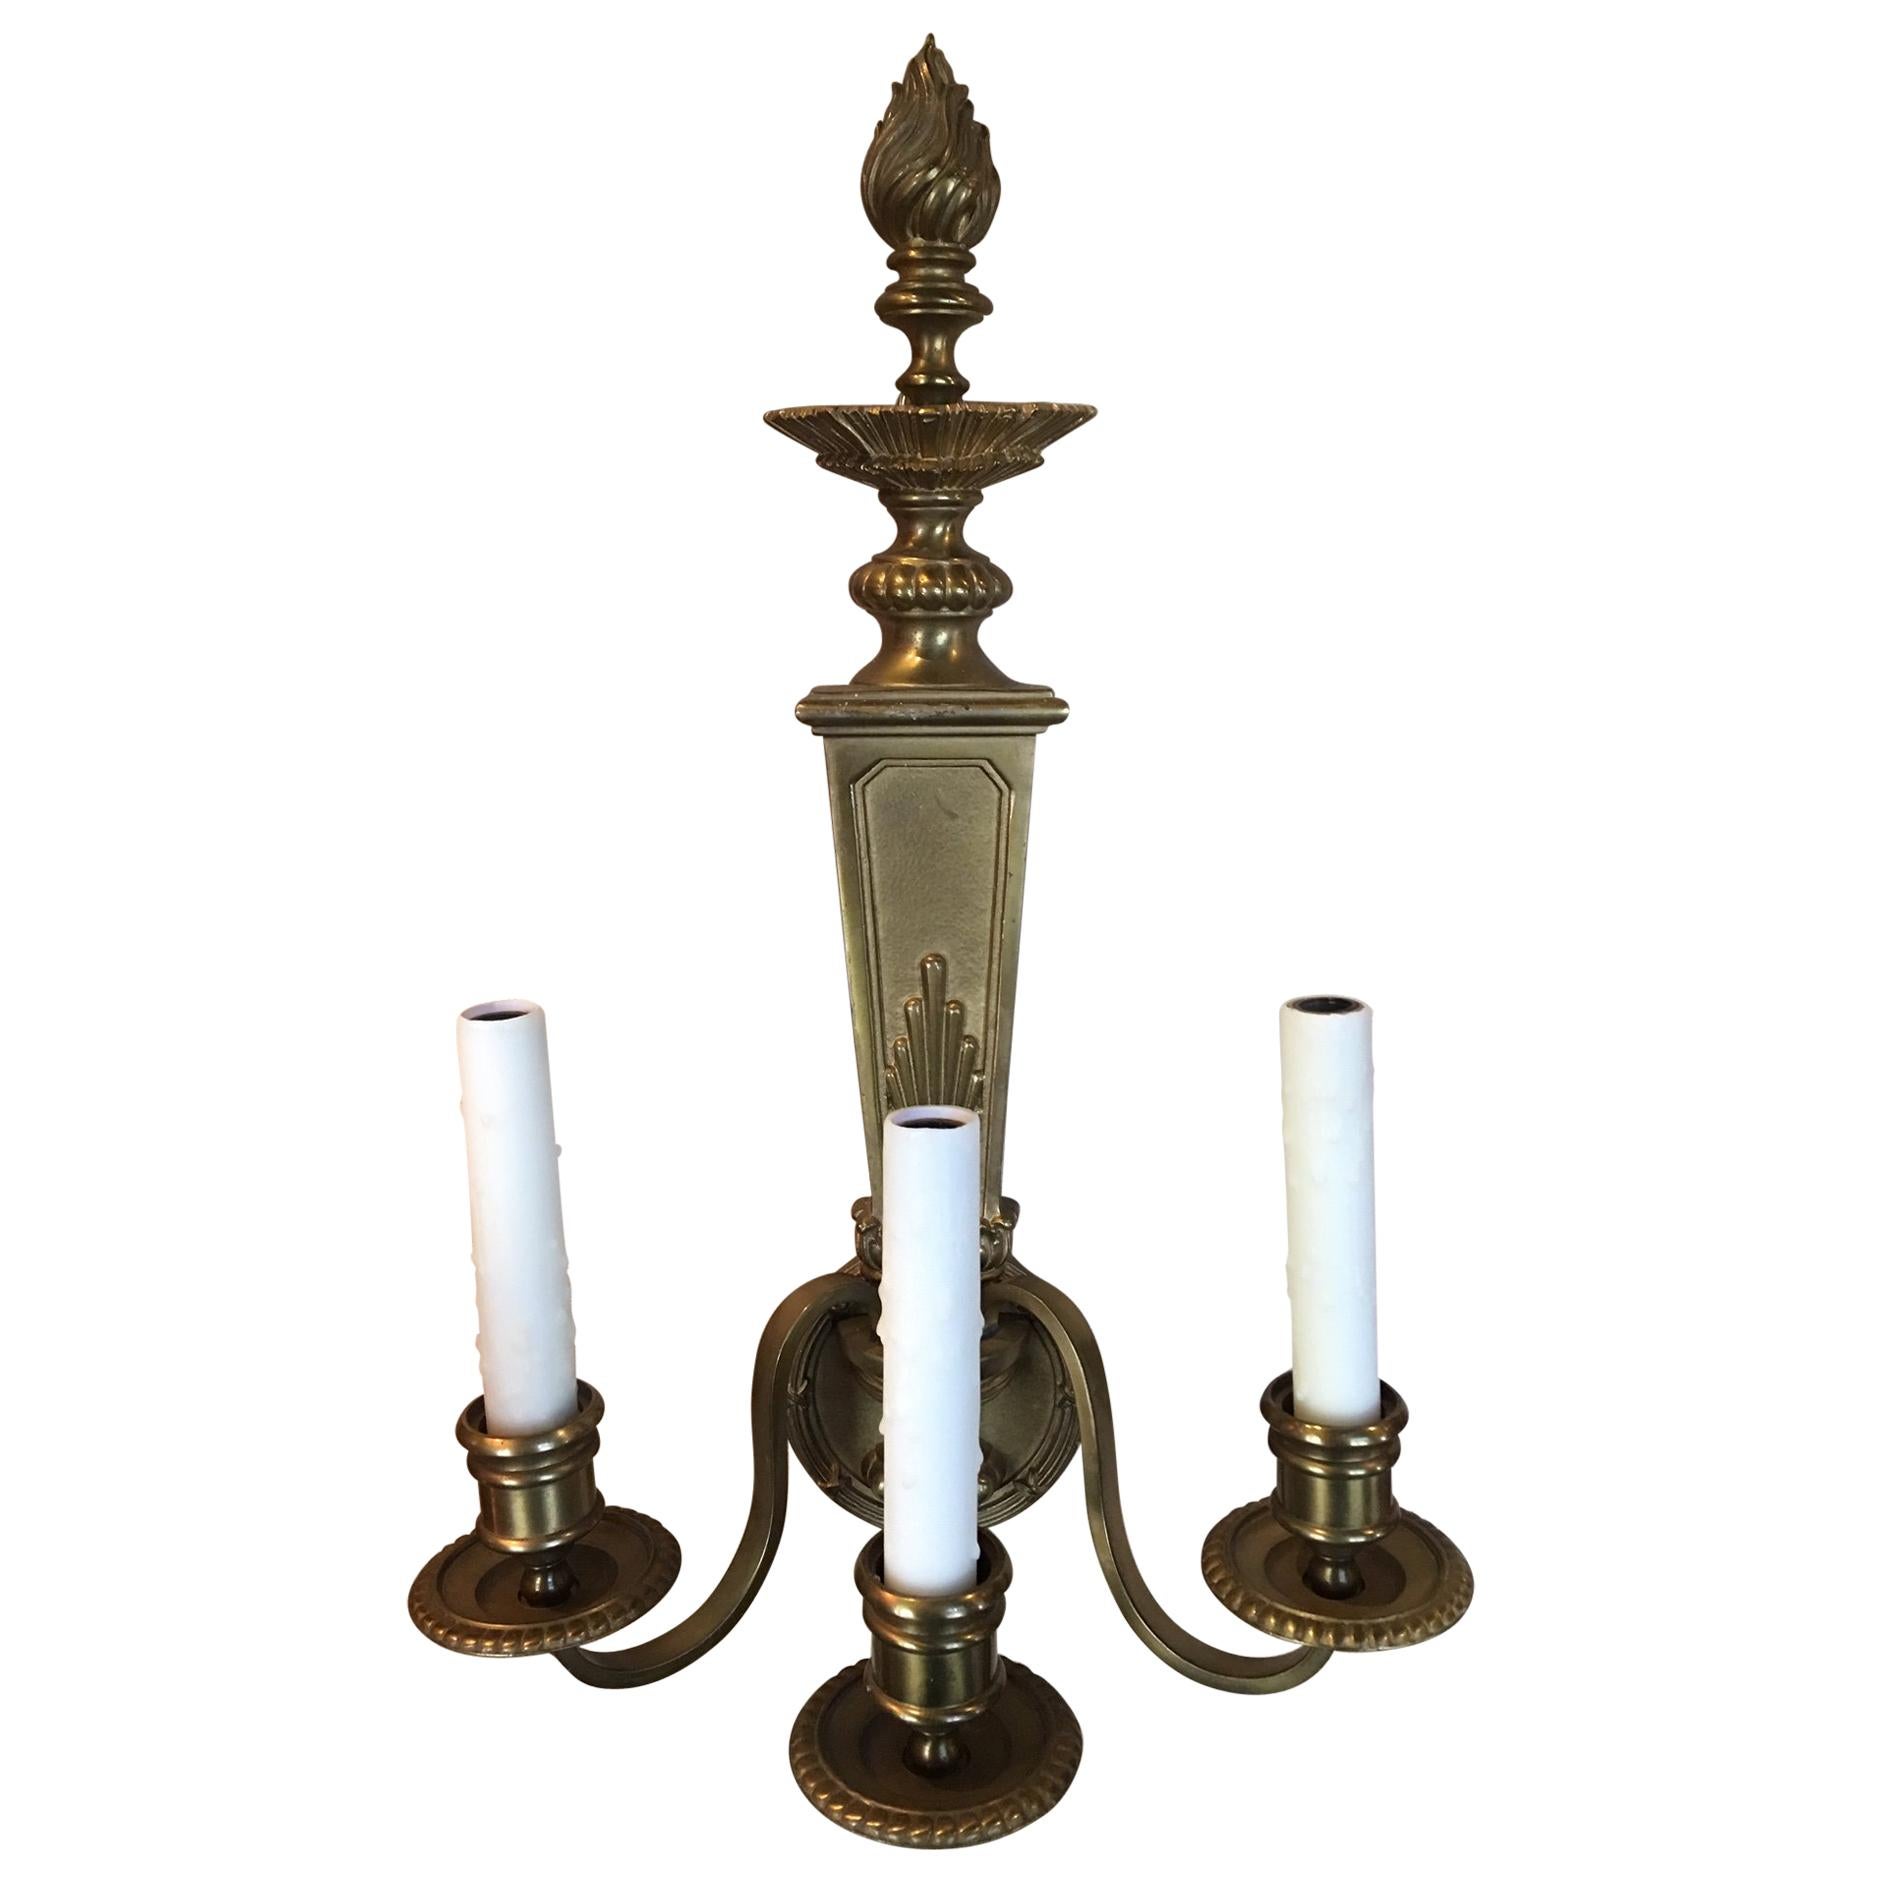 Pair of English Three-Light Bronze Sconces with Flame Top Motif, 20th Century